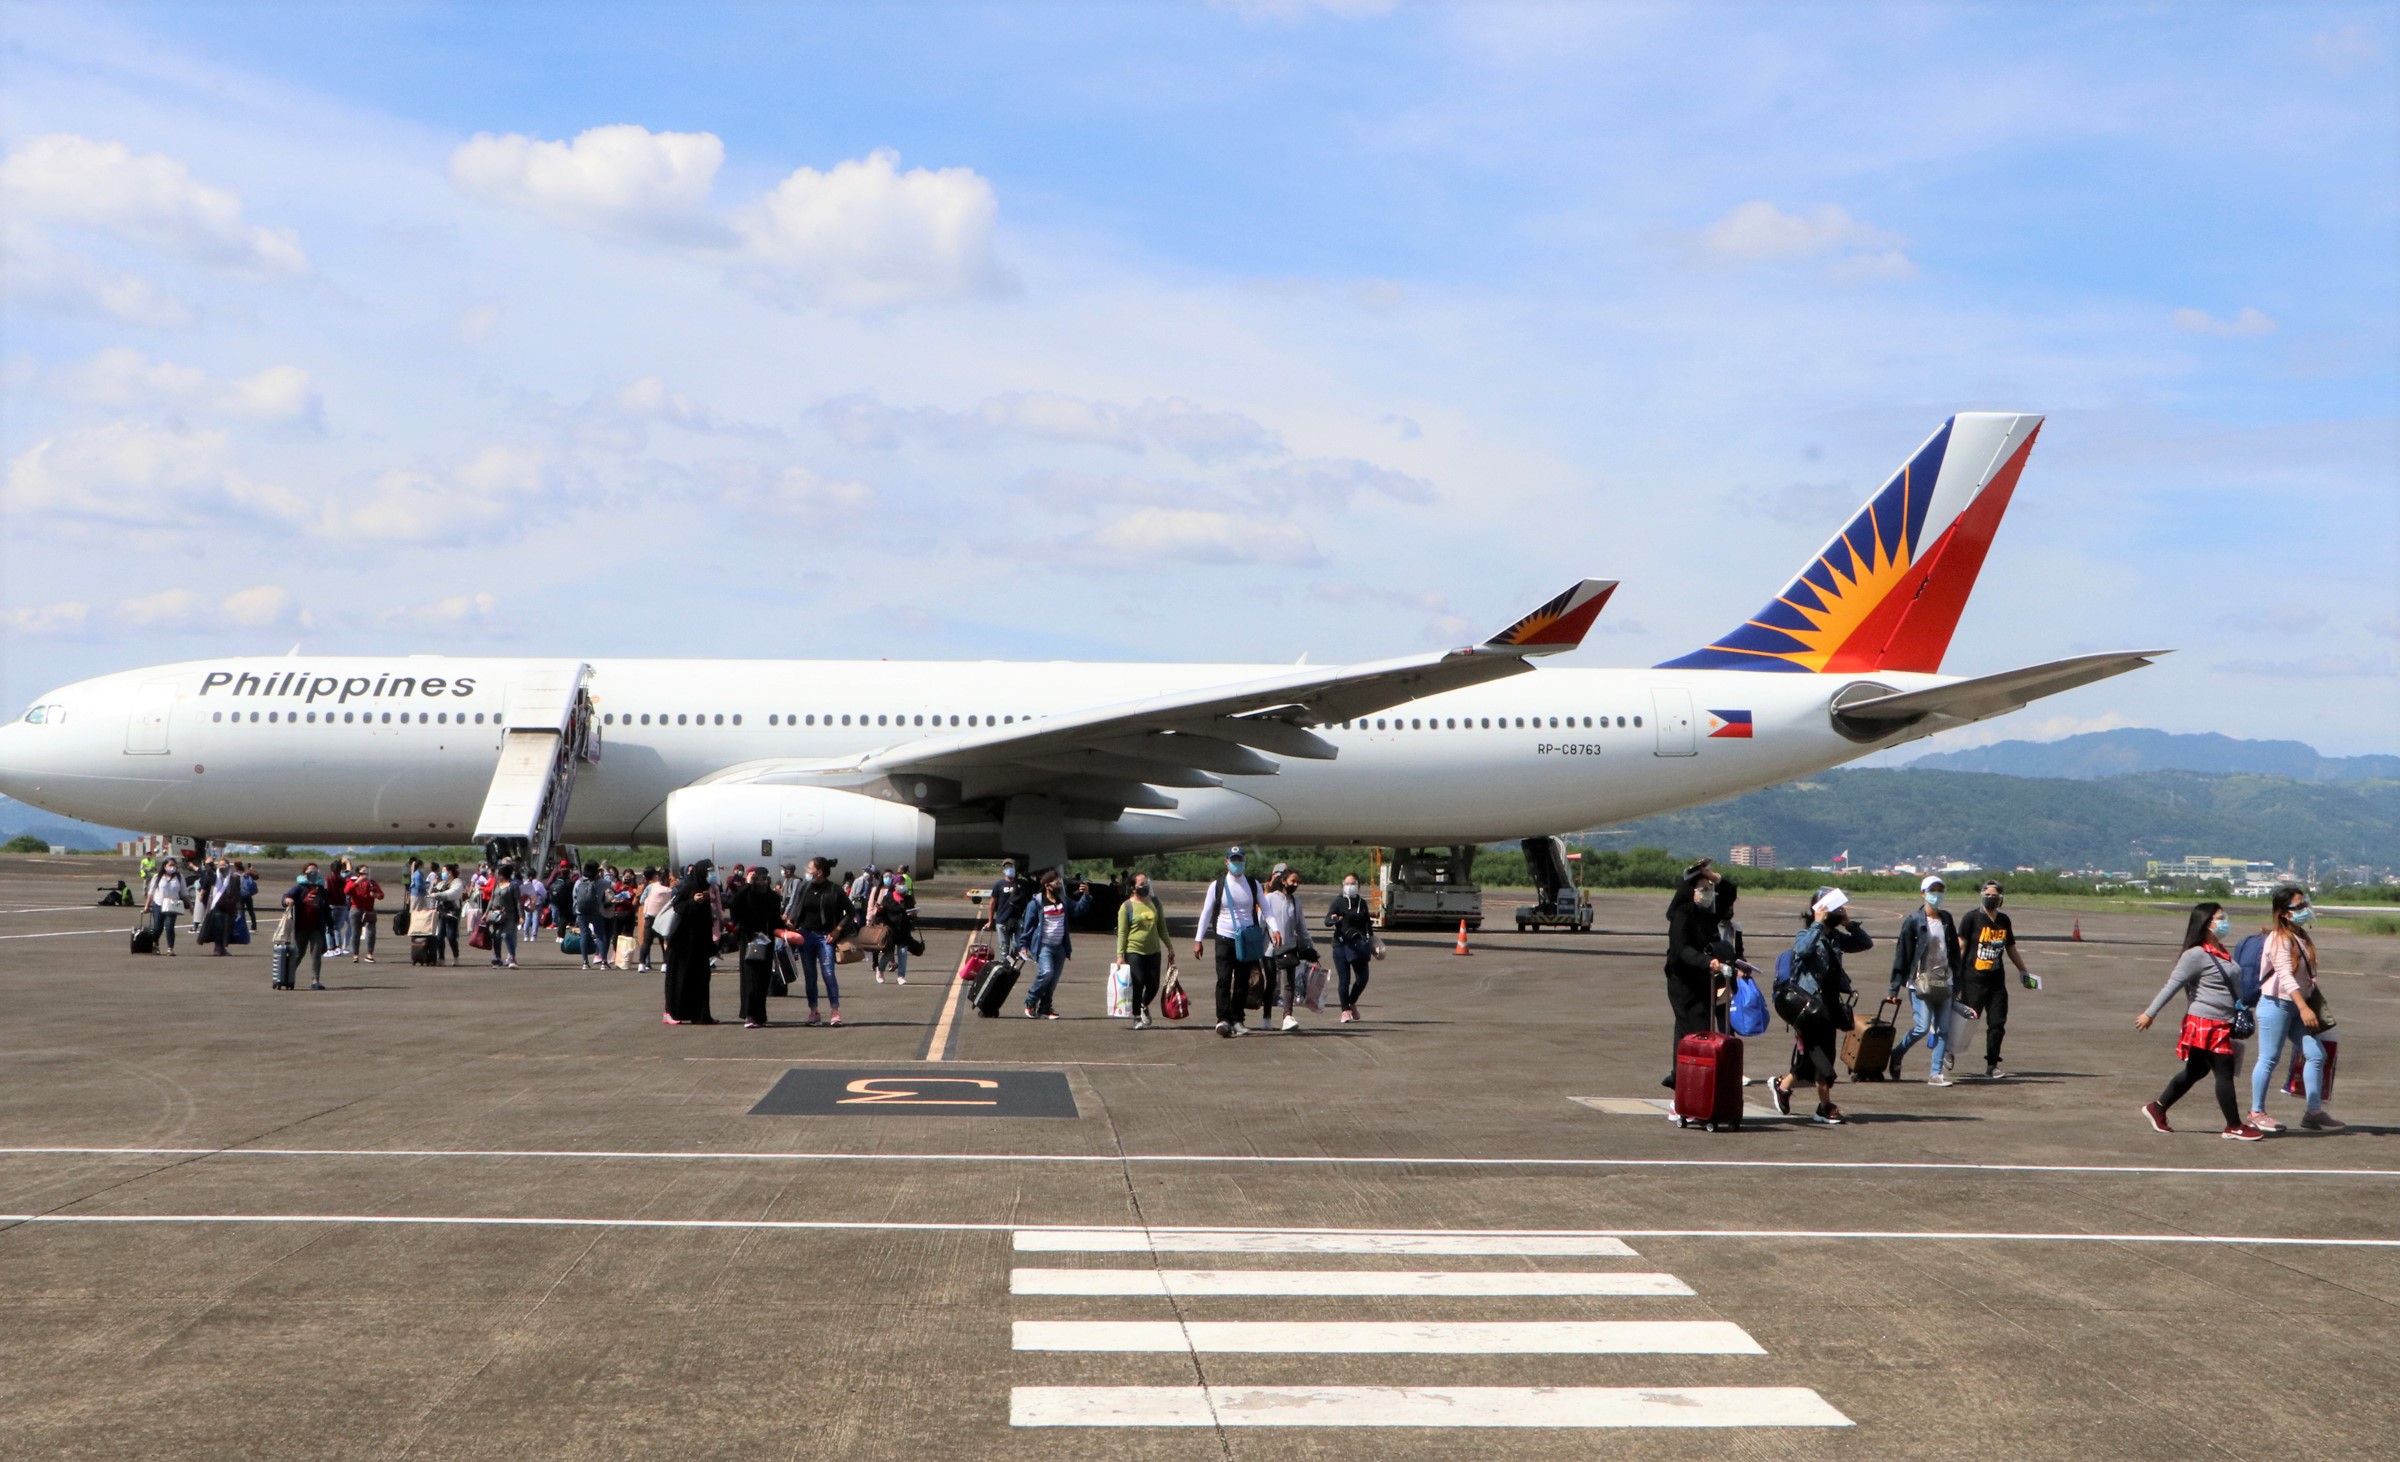 OFW flights from Abu Dhabi arrive at the Subic Bay International Airport